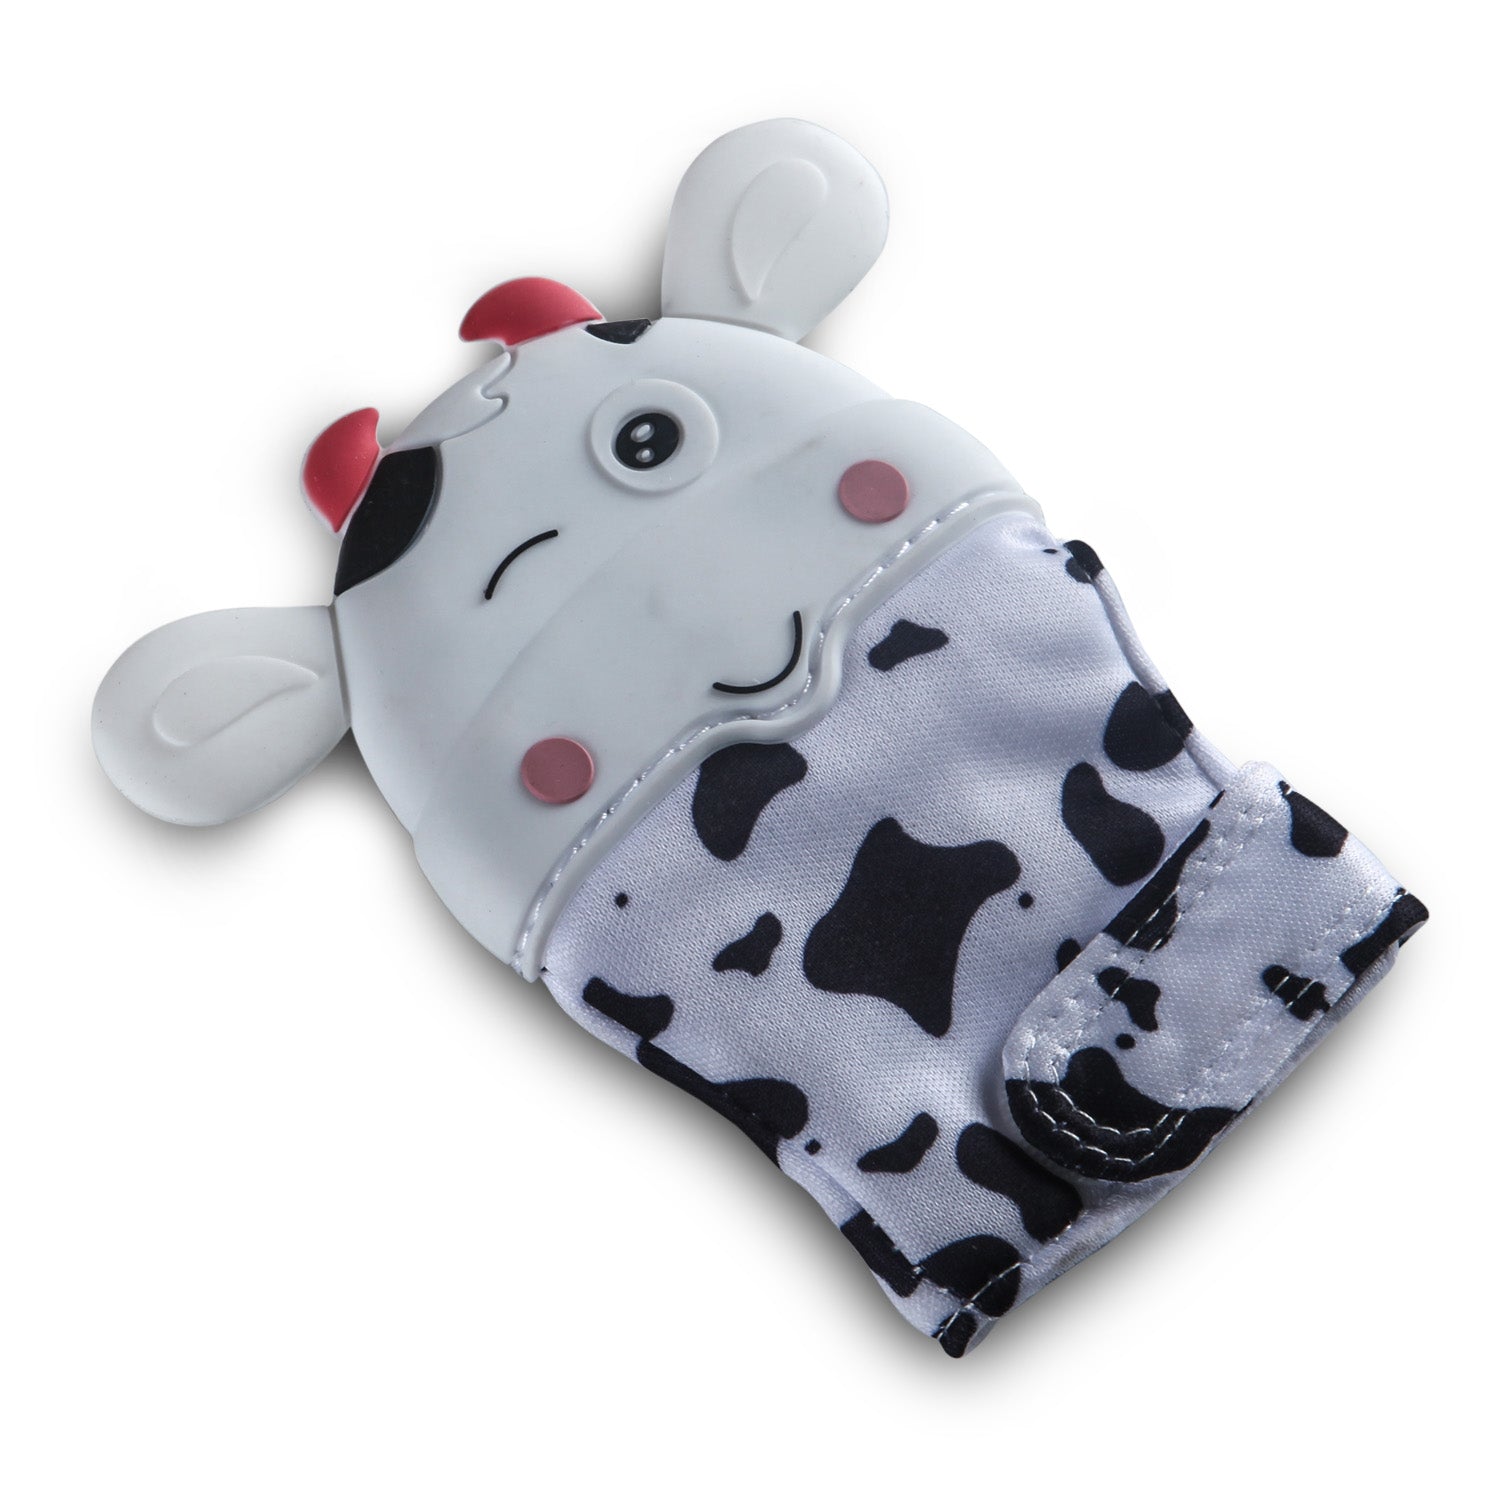 Teething Mitten Silicone Self Soothing Glove 1 Pc Cow Shape - White - Baby Moo